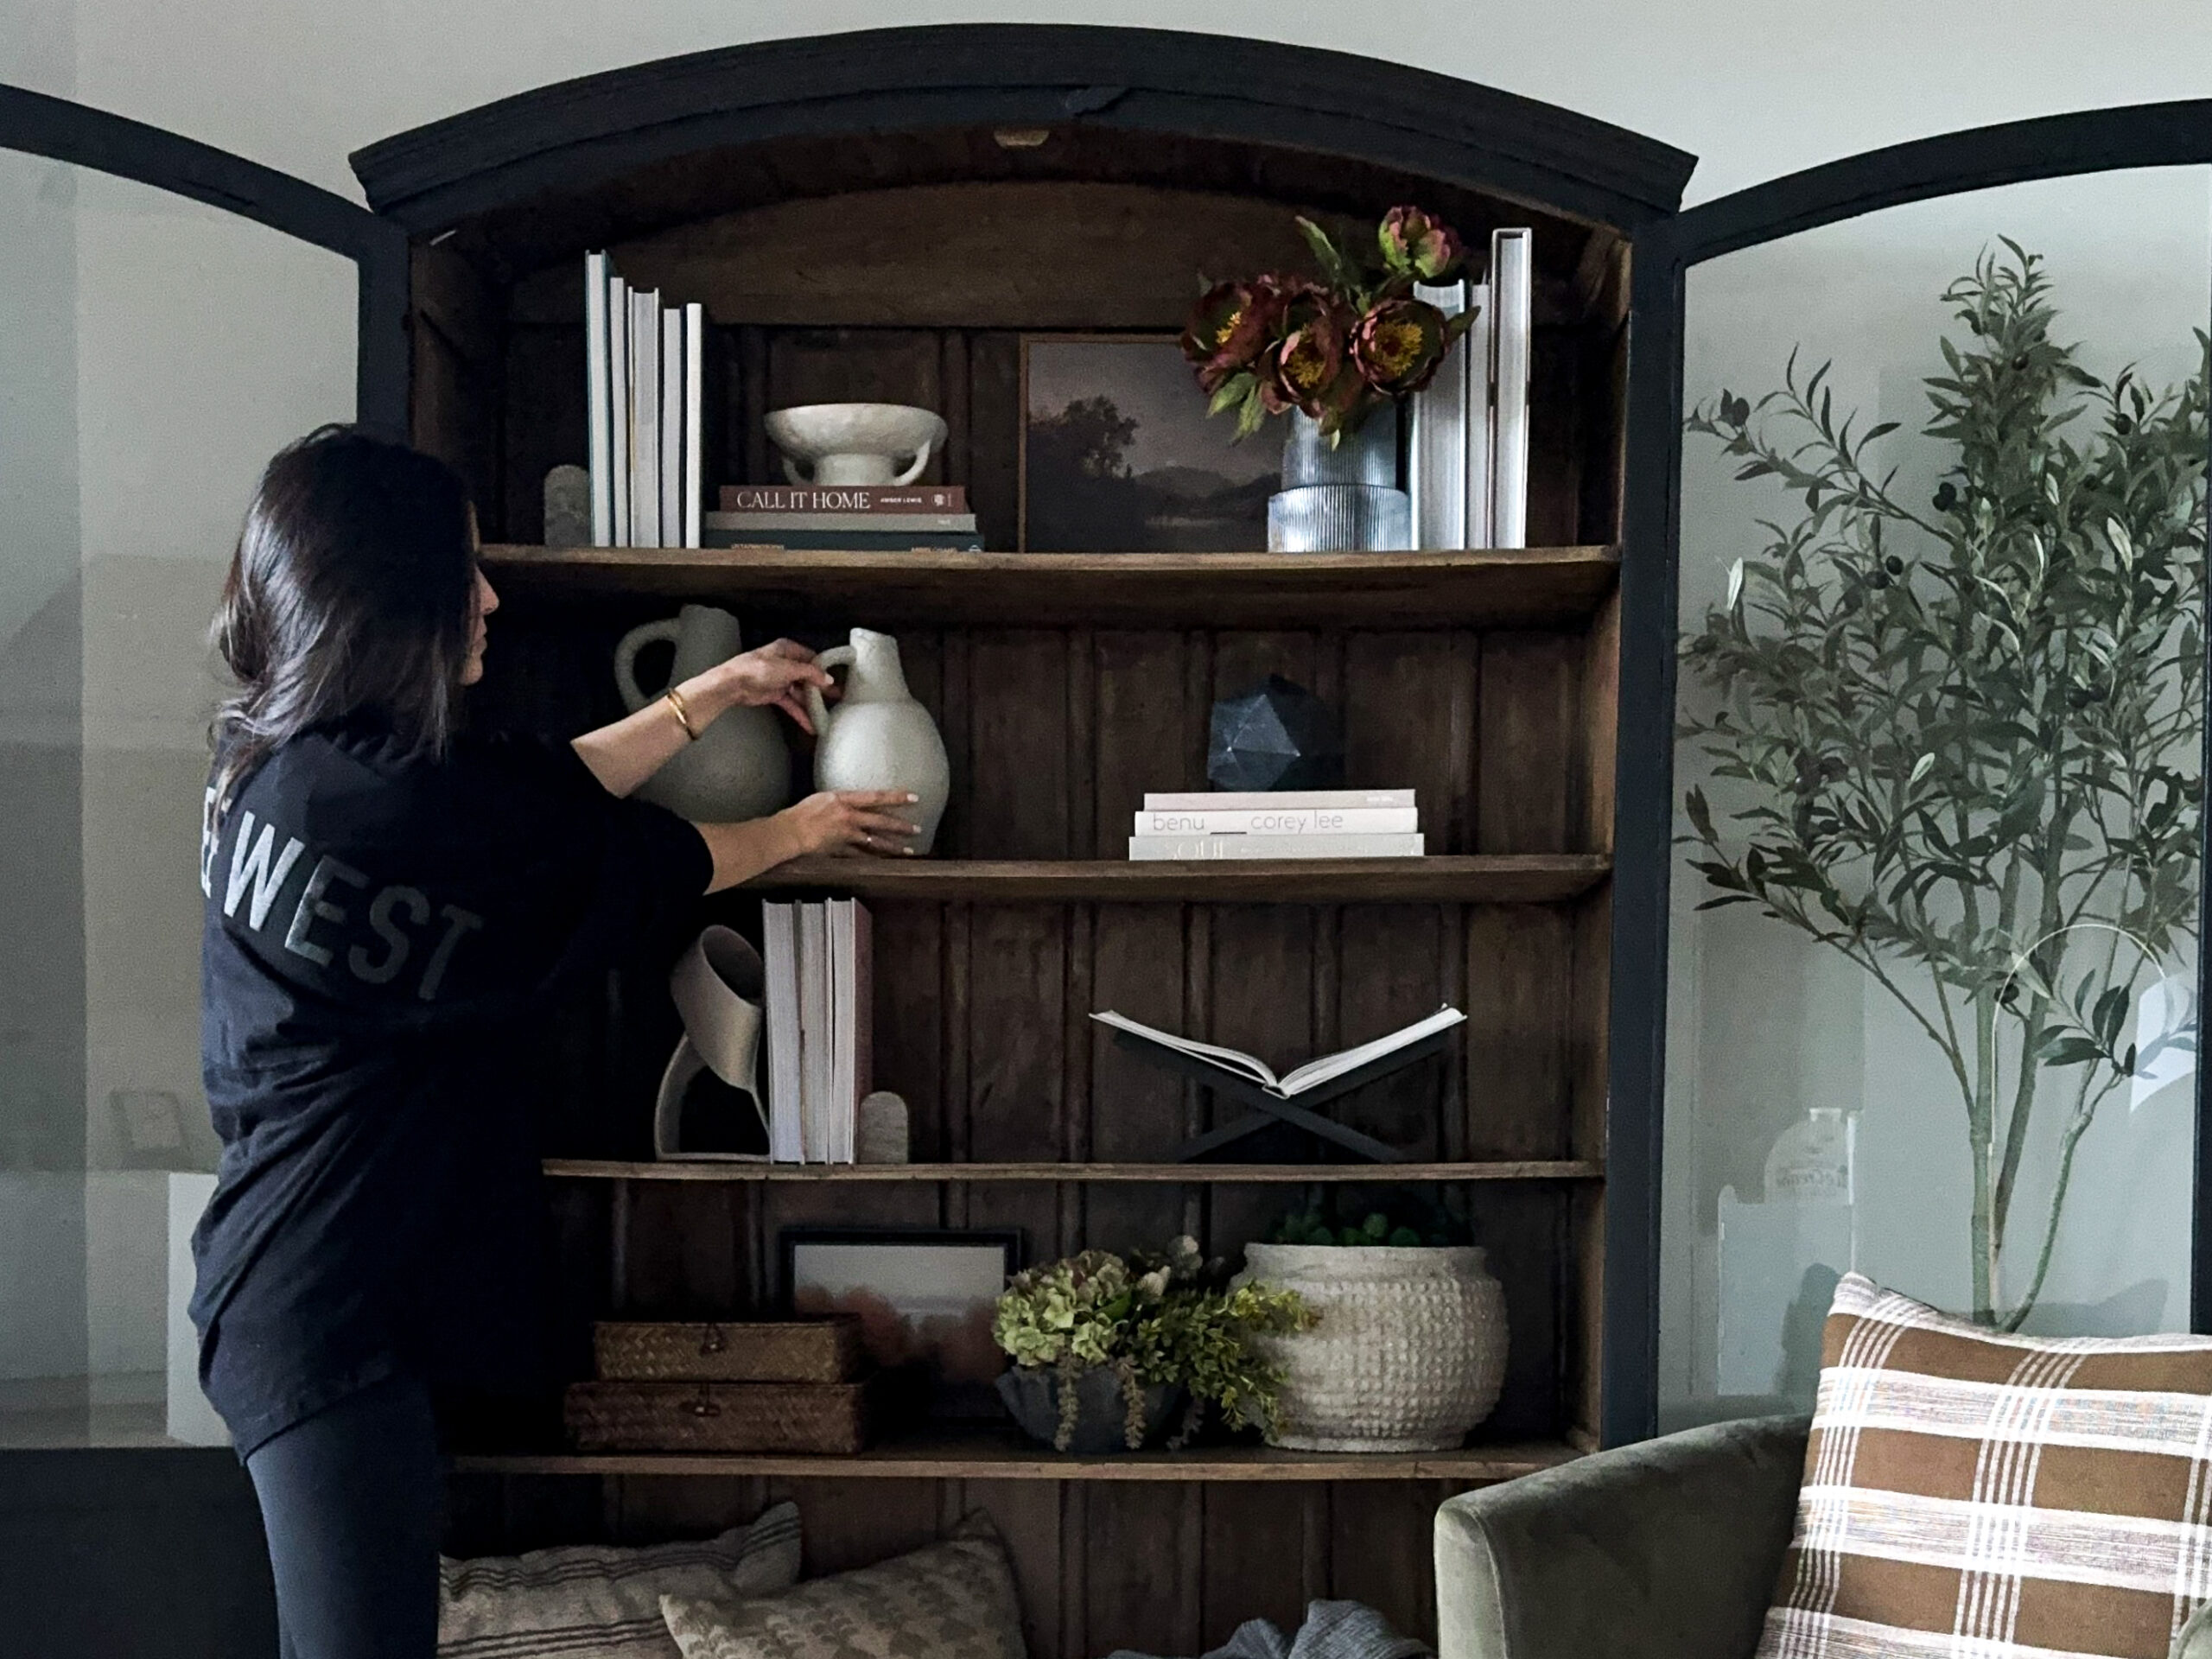 signed samantha styling shelves in her black arched cabinet. the shelves have books, plants, vases, and other decorative objects on it.